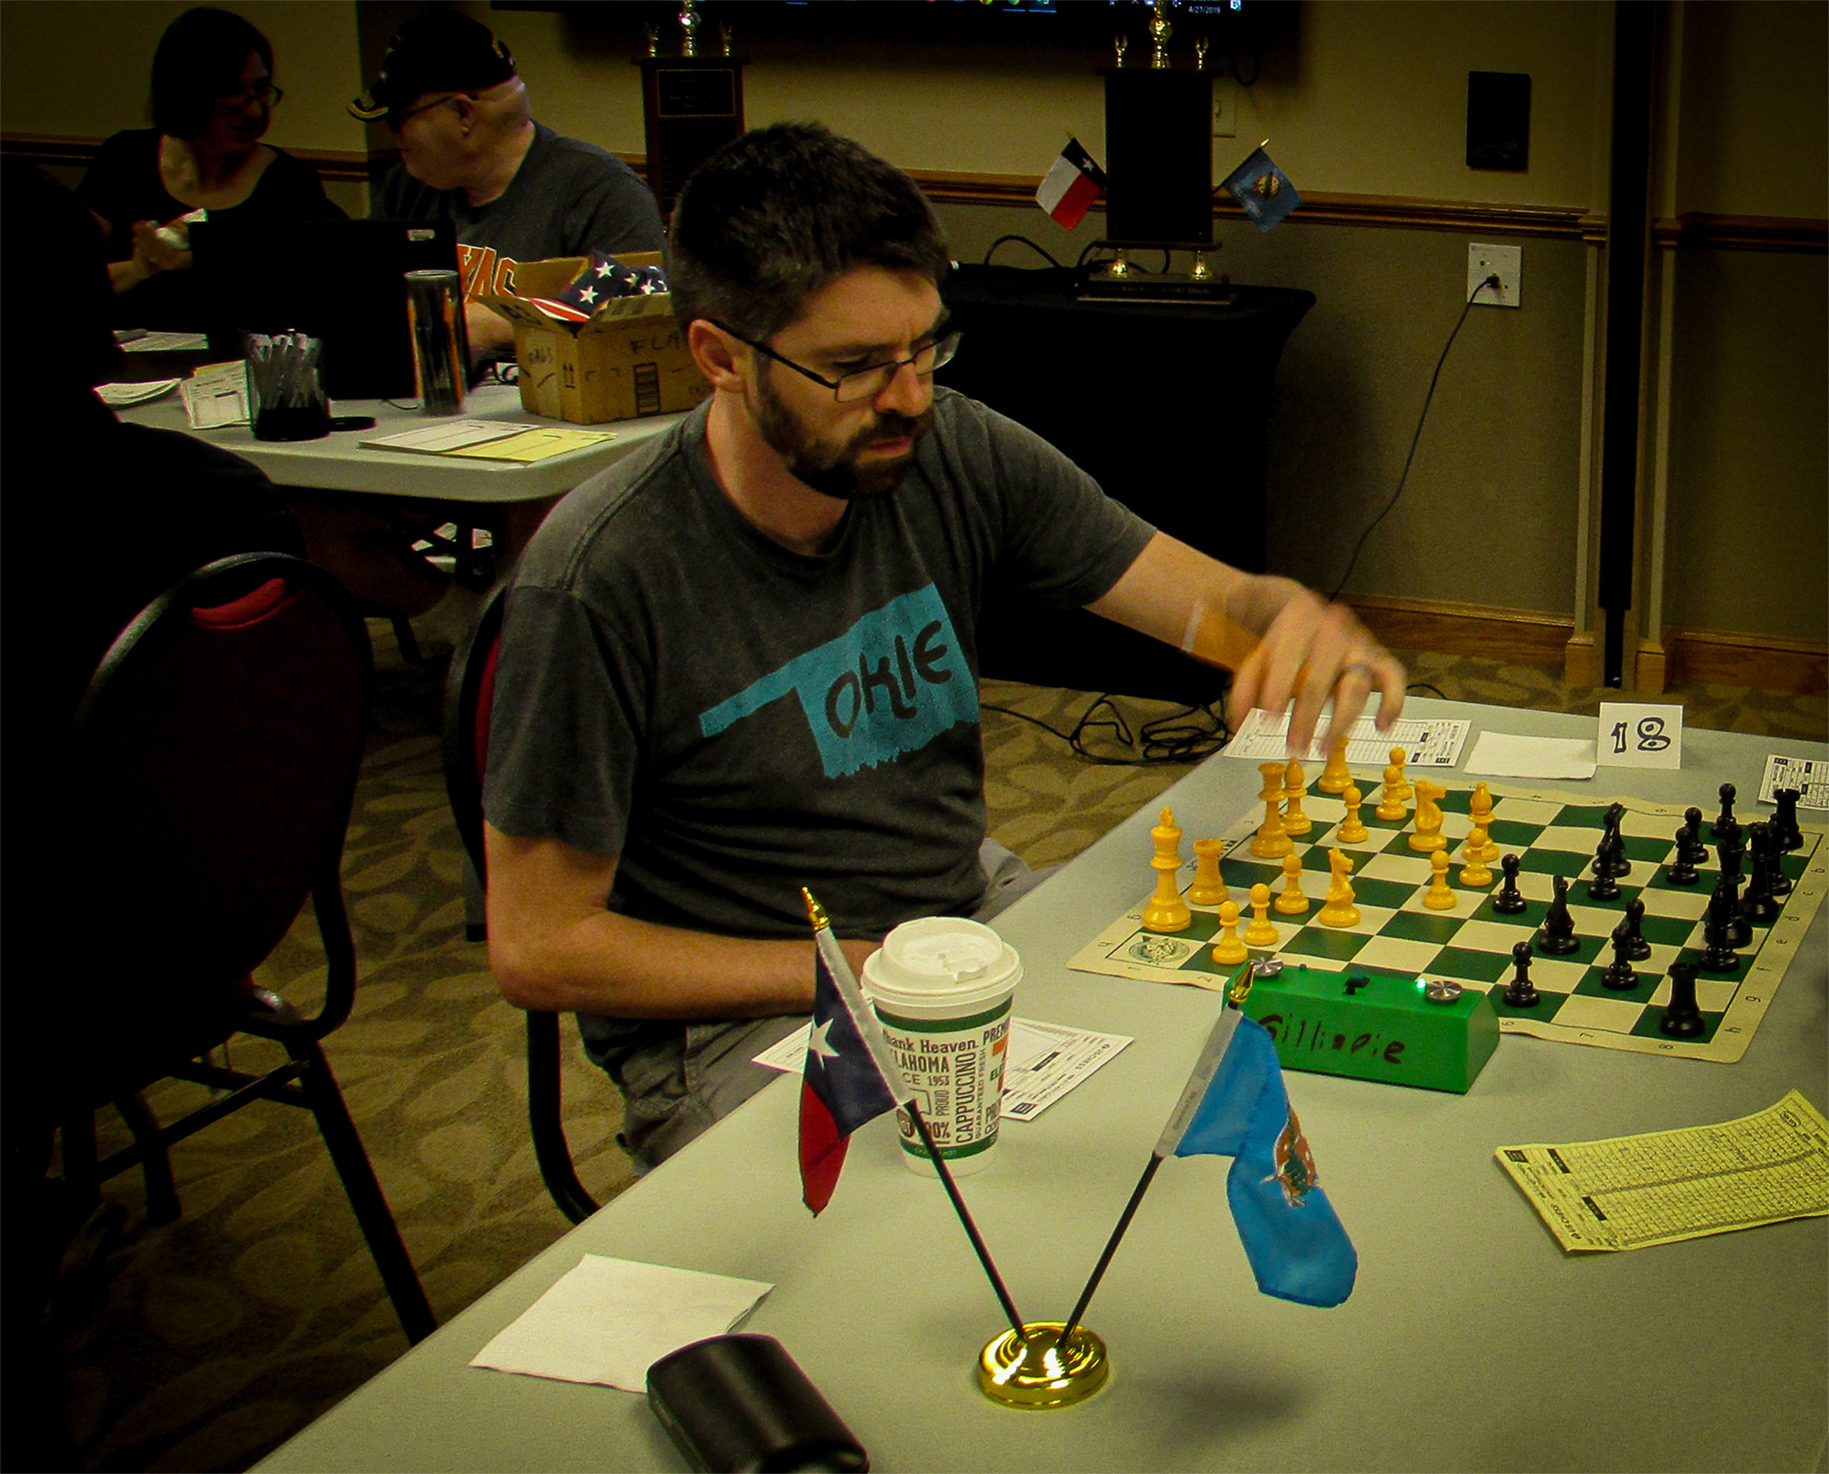 Rookie Ishmael Kissinger hails from Oklahoma City and is a fast rising star for Oklahoma chess.  He played in his first rated tournament only a year ago and sports a solid 55.6 win percentage.  His 2-0 sweep over a tough opponent on Board 18 caught everybody's attention.  Photo by Mike Tubbs.